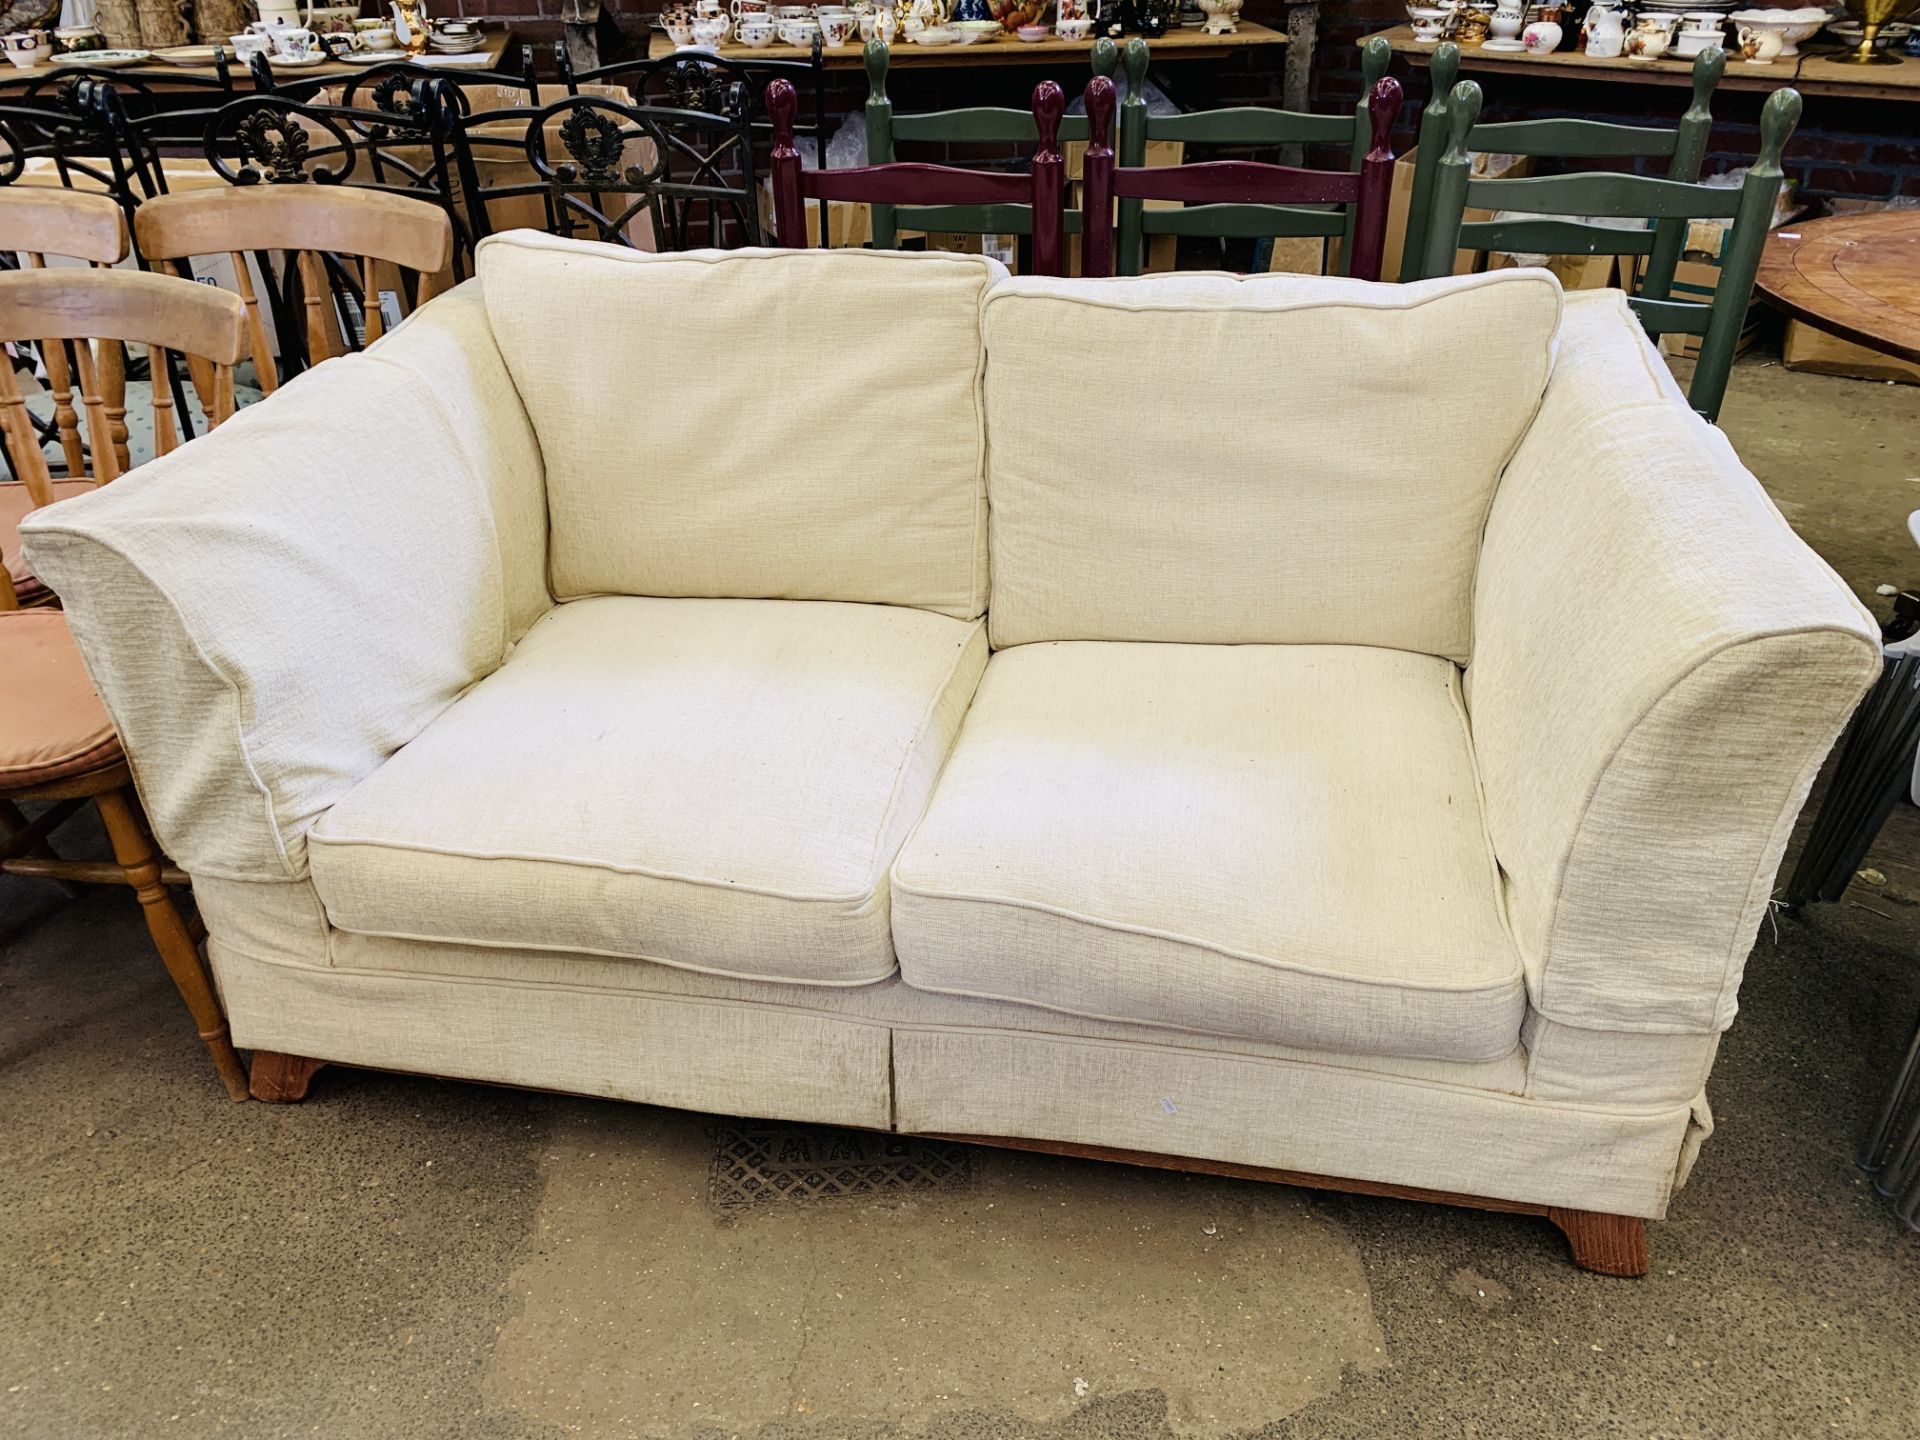 Cream upholstered two seat sofa - Image 2 of 4